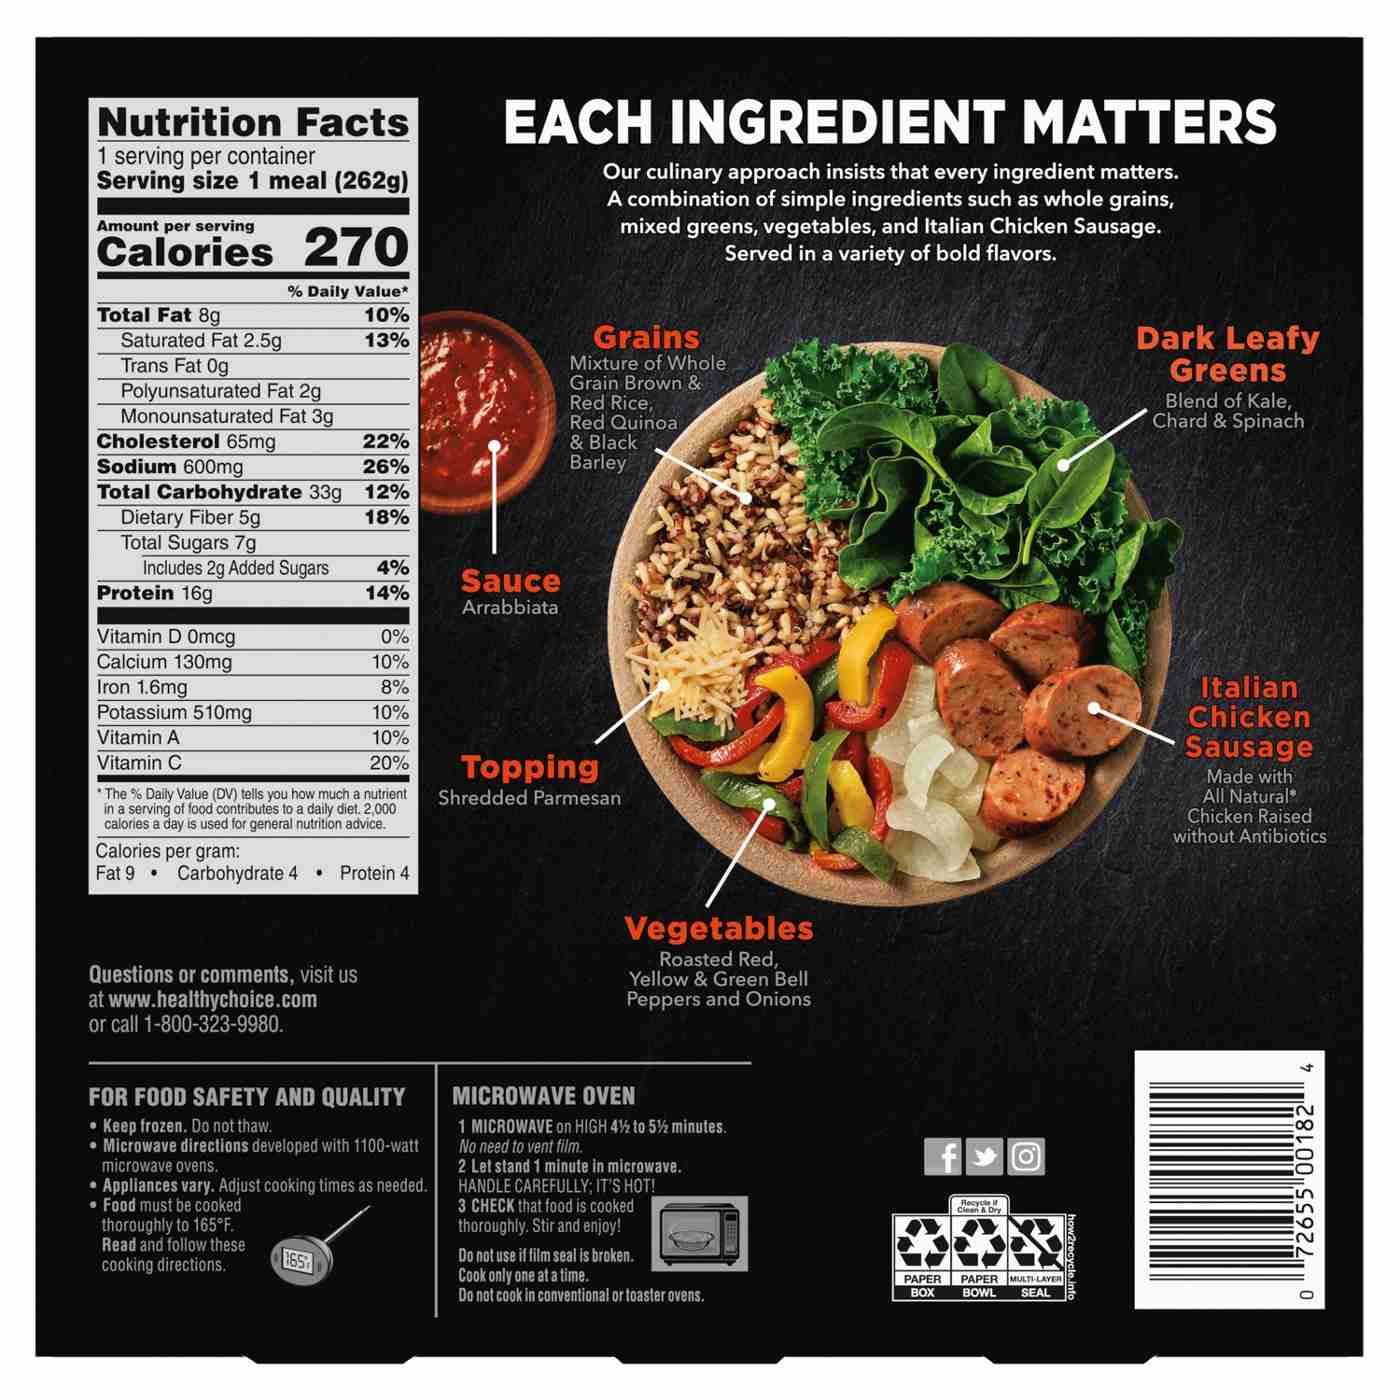 Healthy Choice Power Bowls Italian Chicken Sausage & Peppers Frozen Meal; image 7 of 7